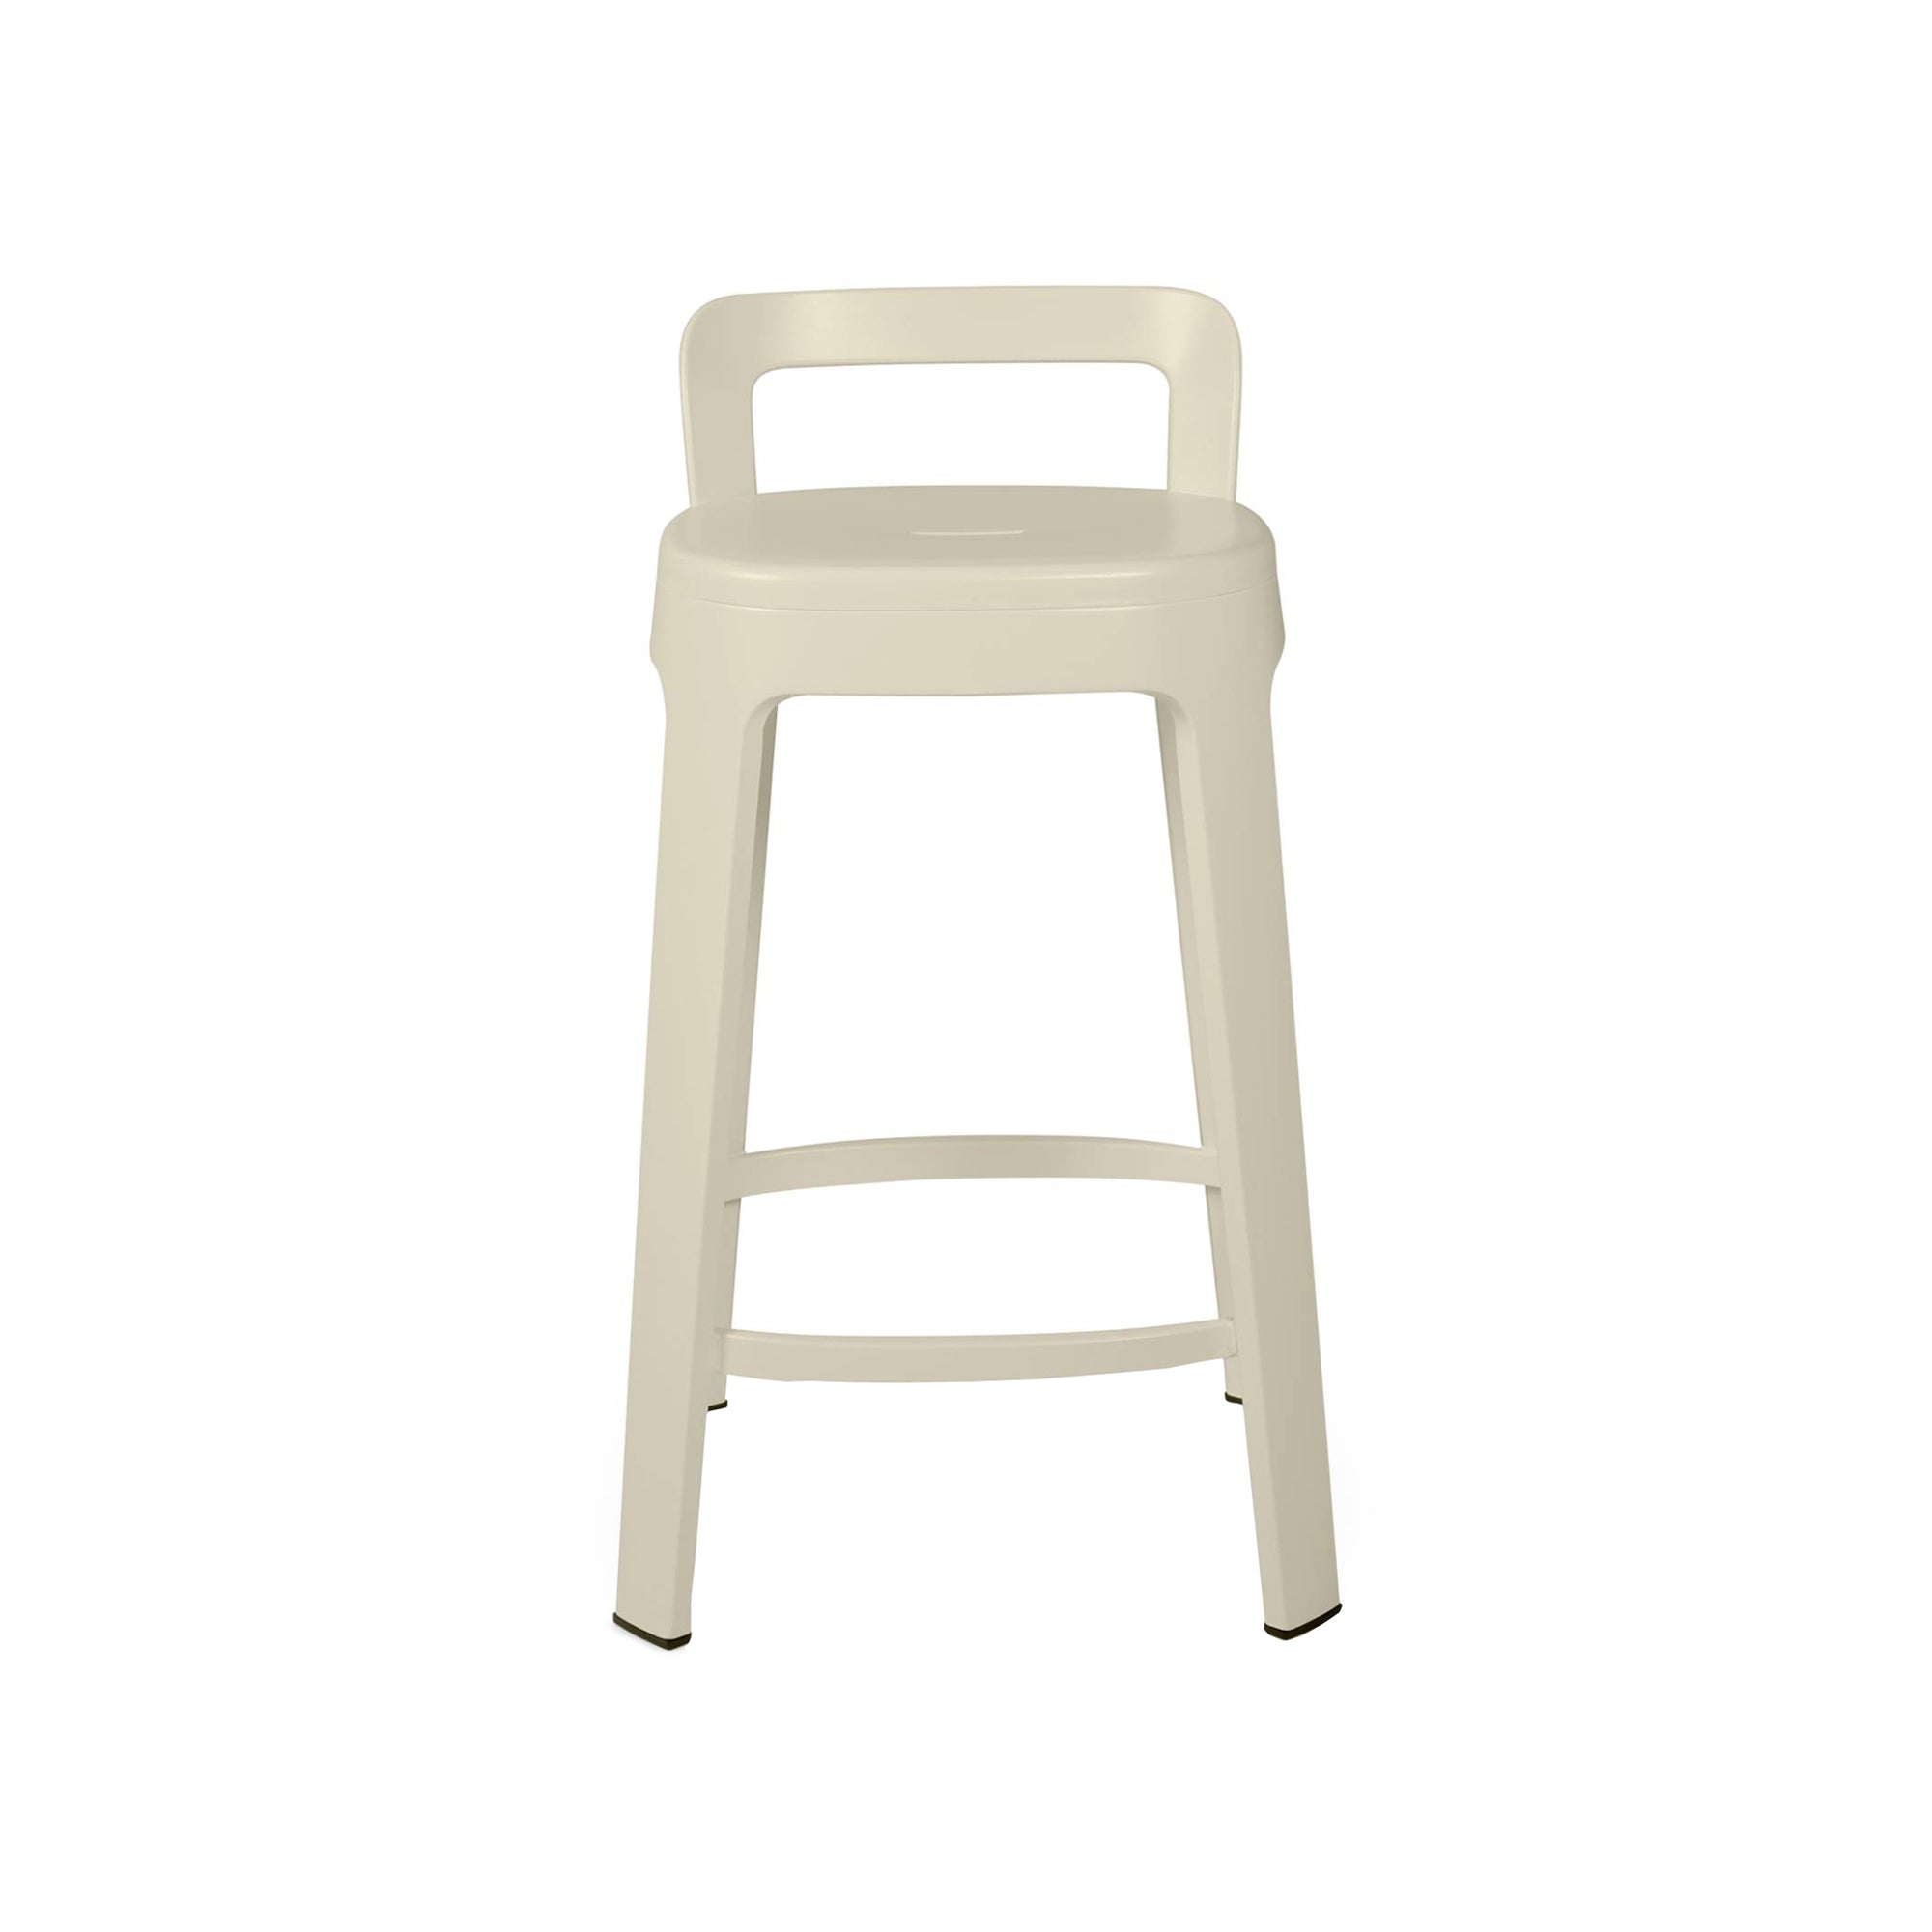 Ombra Bar + Counter Stool with Backrest: Counter + Grey